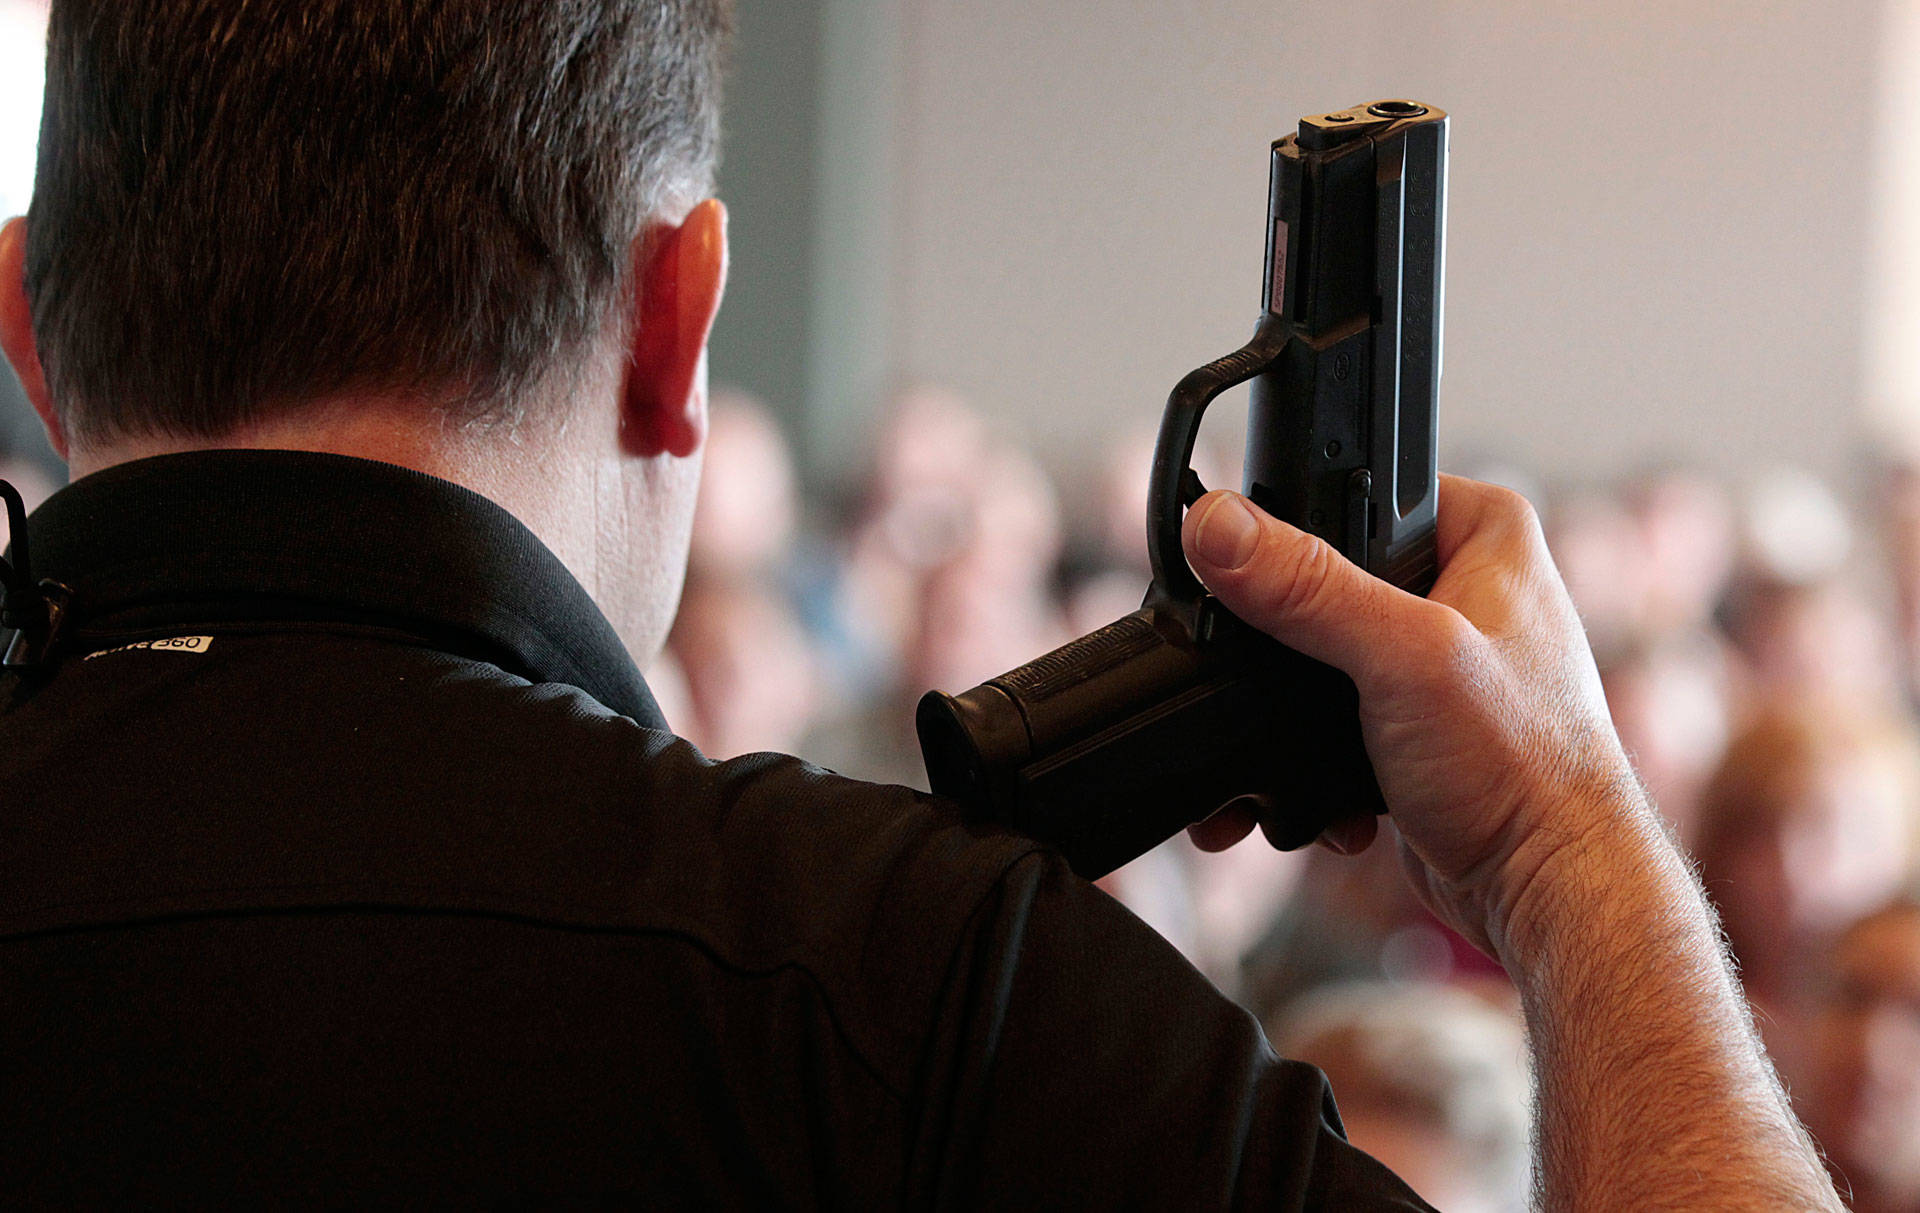 A firearm instructor holds a handgun up as he teaches a concealed-weapons training class to teachers in Utah. George Frey/Getty Images